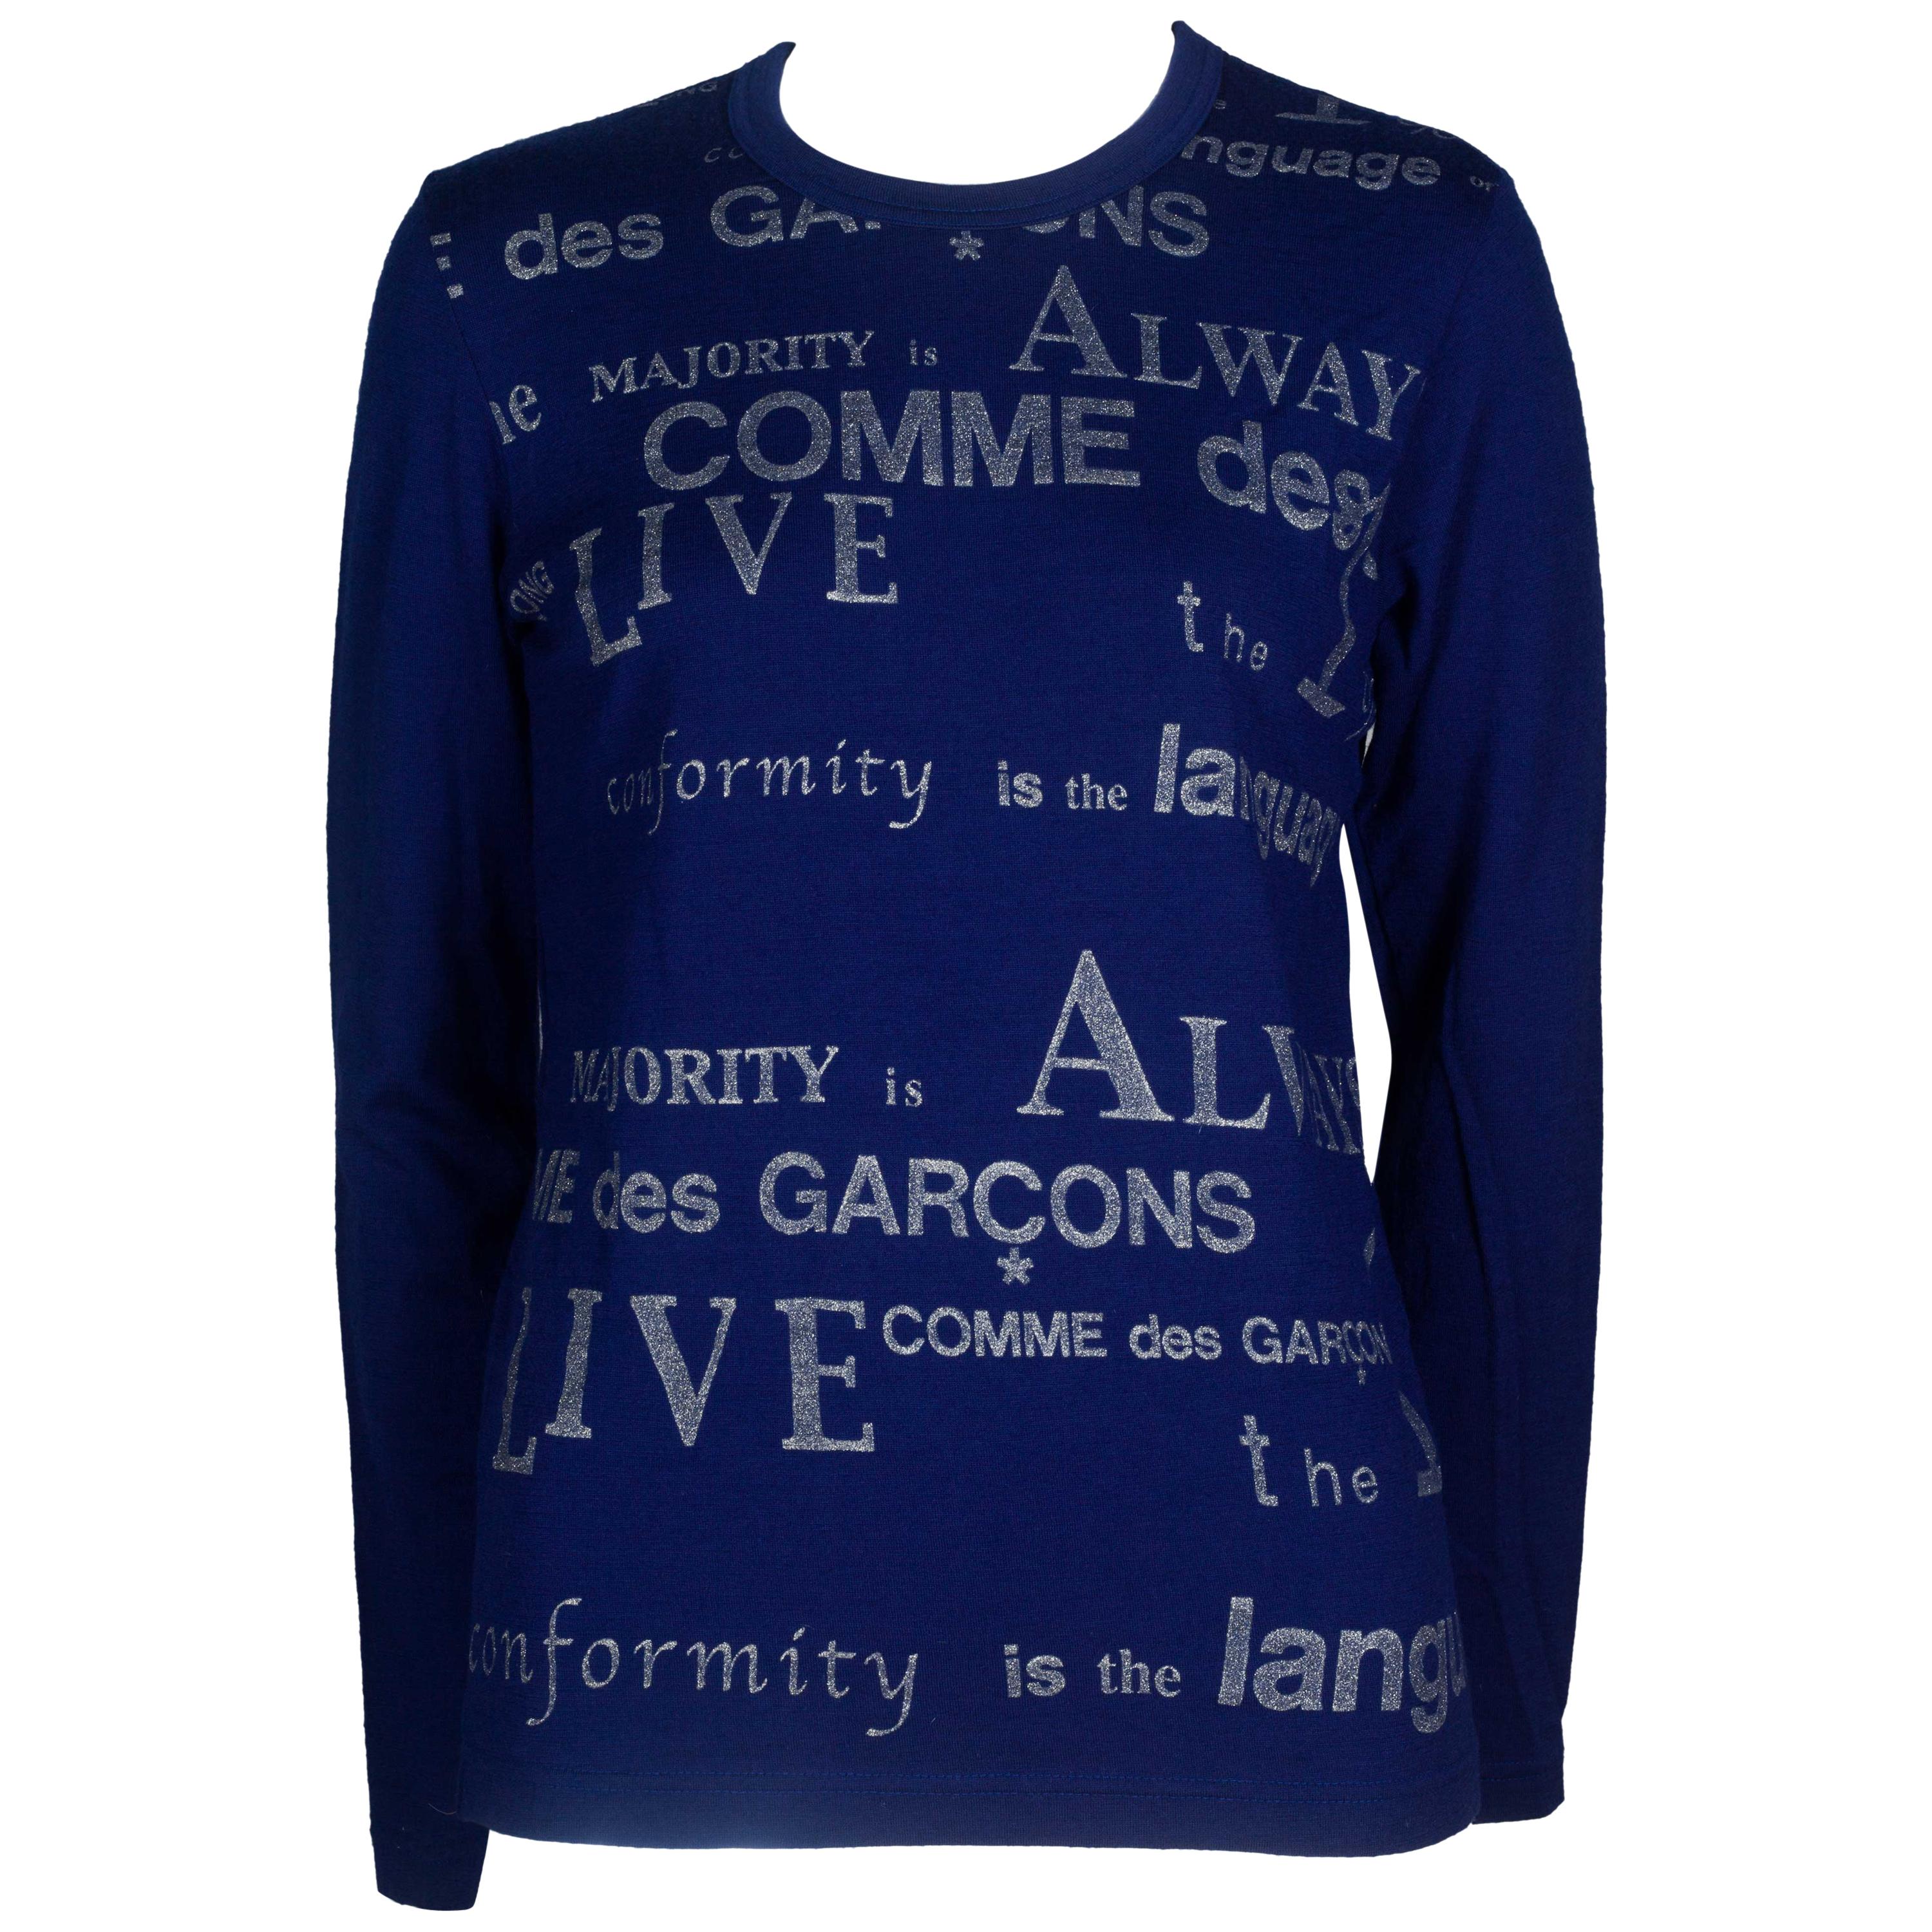 Comme des Garçons Blue Long Sleeve Shirt with Printed Words, 2003